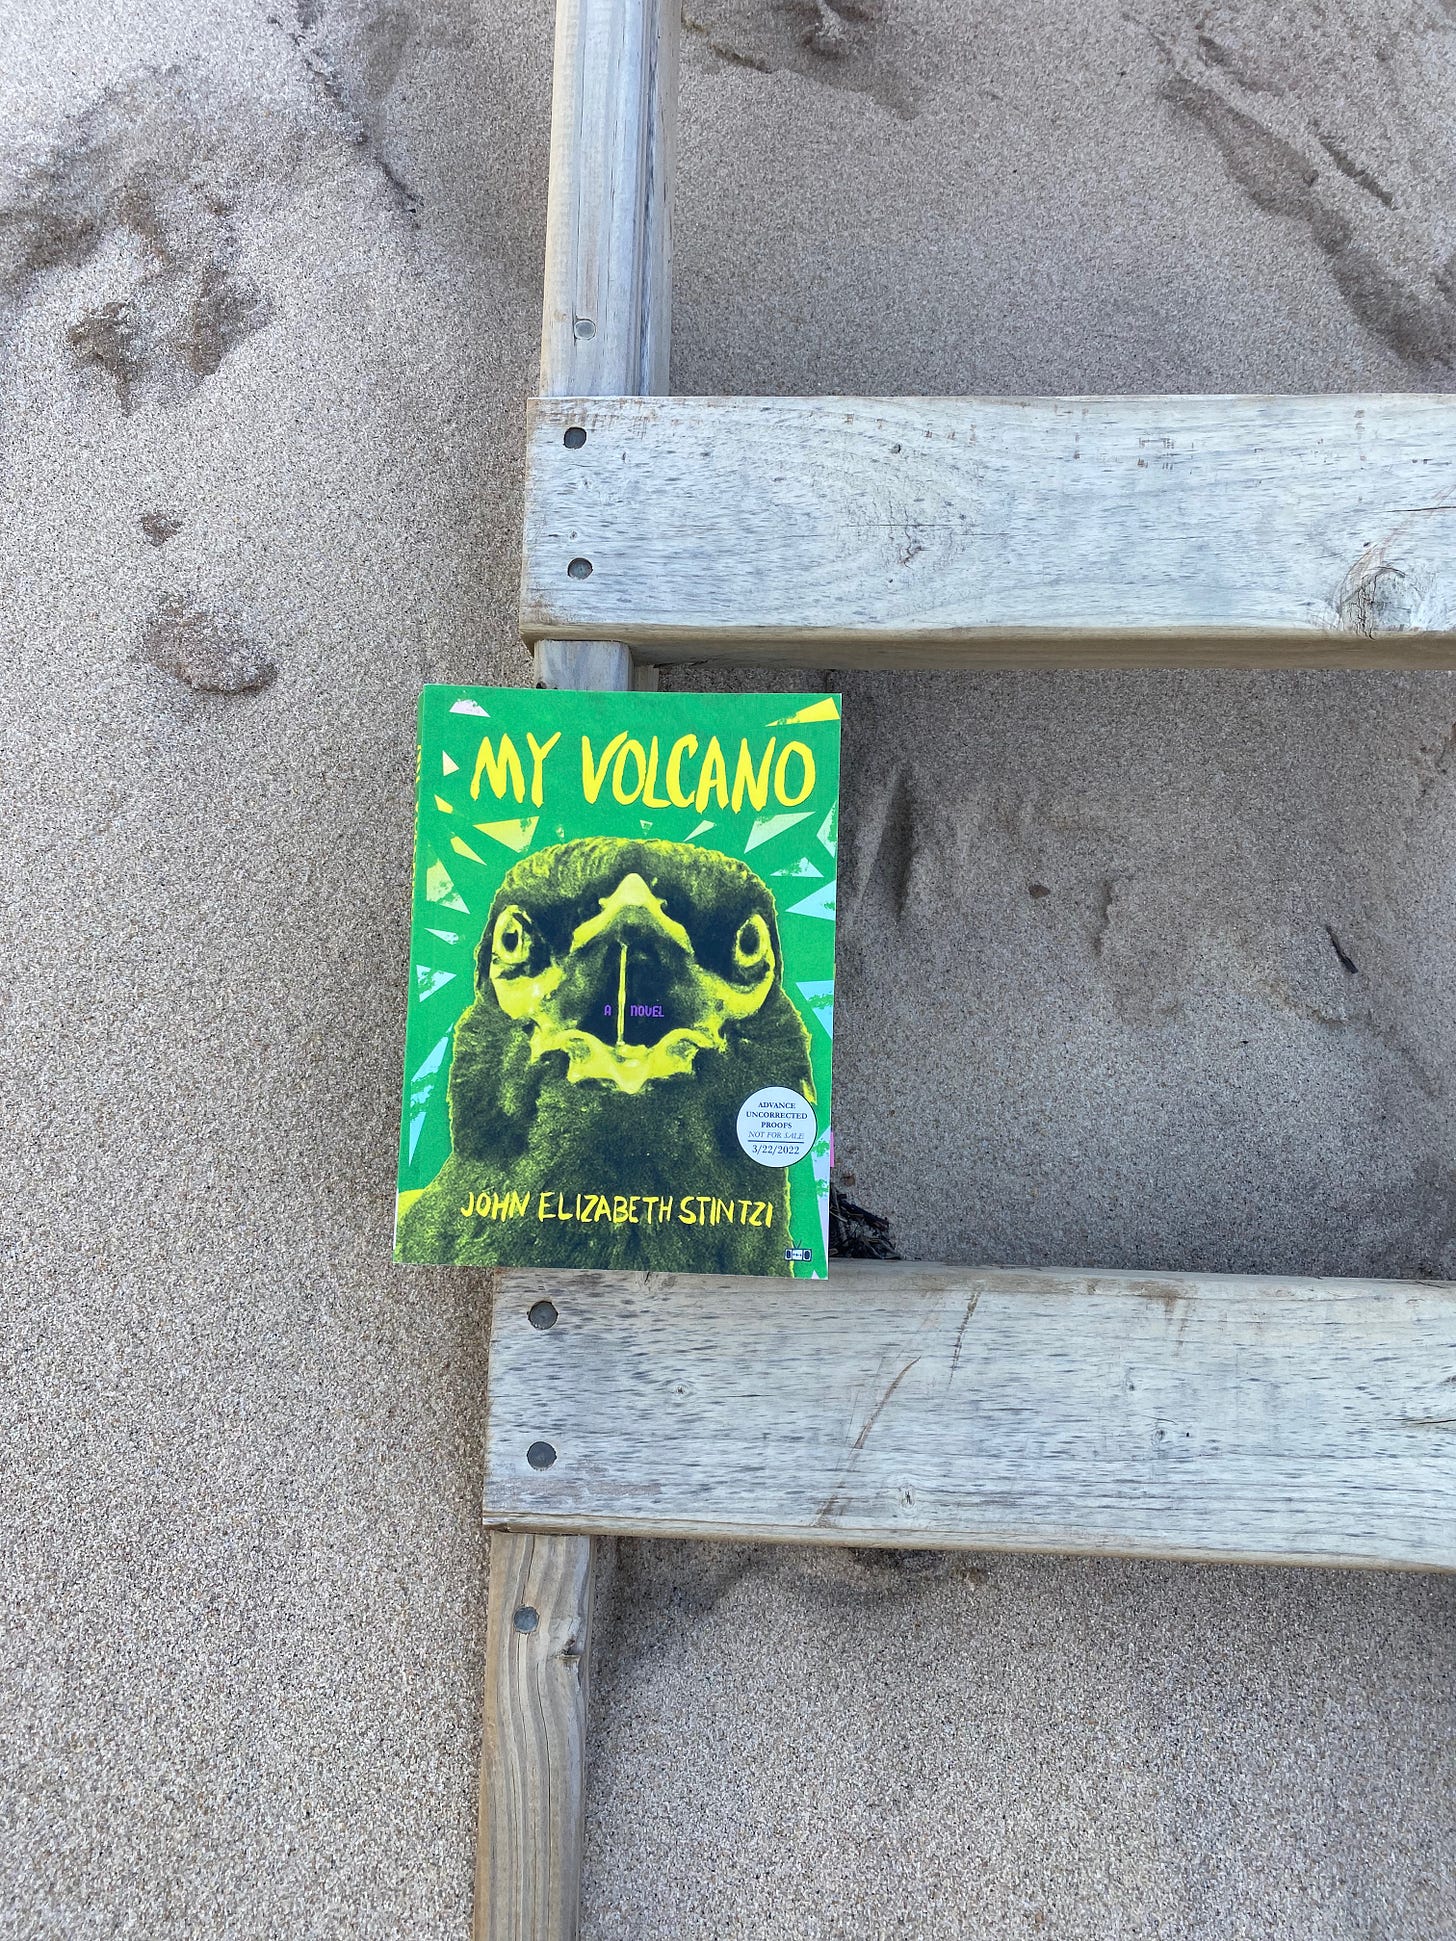 A paperback copy of My Volcano rests on the wrung of a weathered wooden ladder on a beach. Only two rungs are visible; the rest of the photo is taken up by sand. The cover of the book is bright green, with the image of a bird with a large beak.